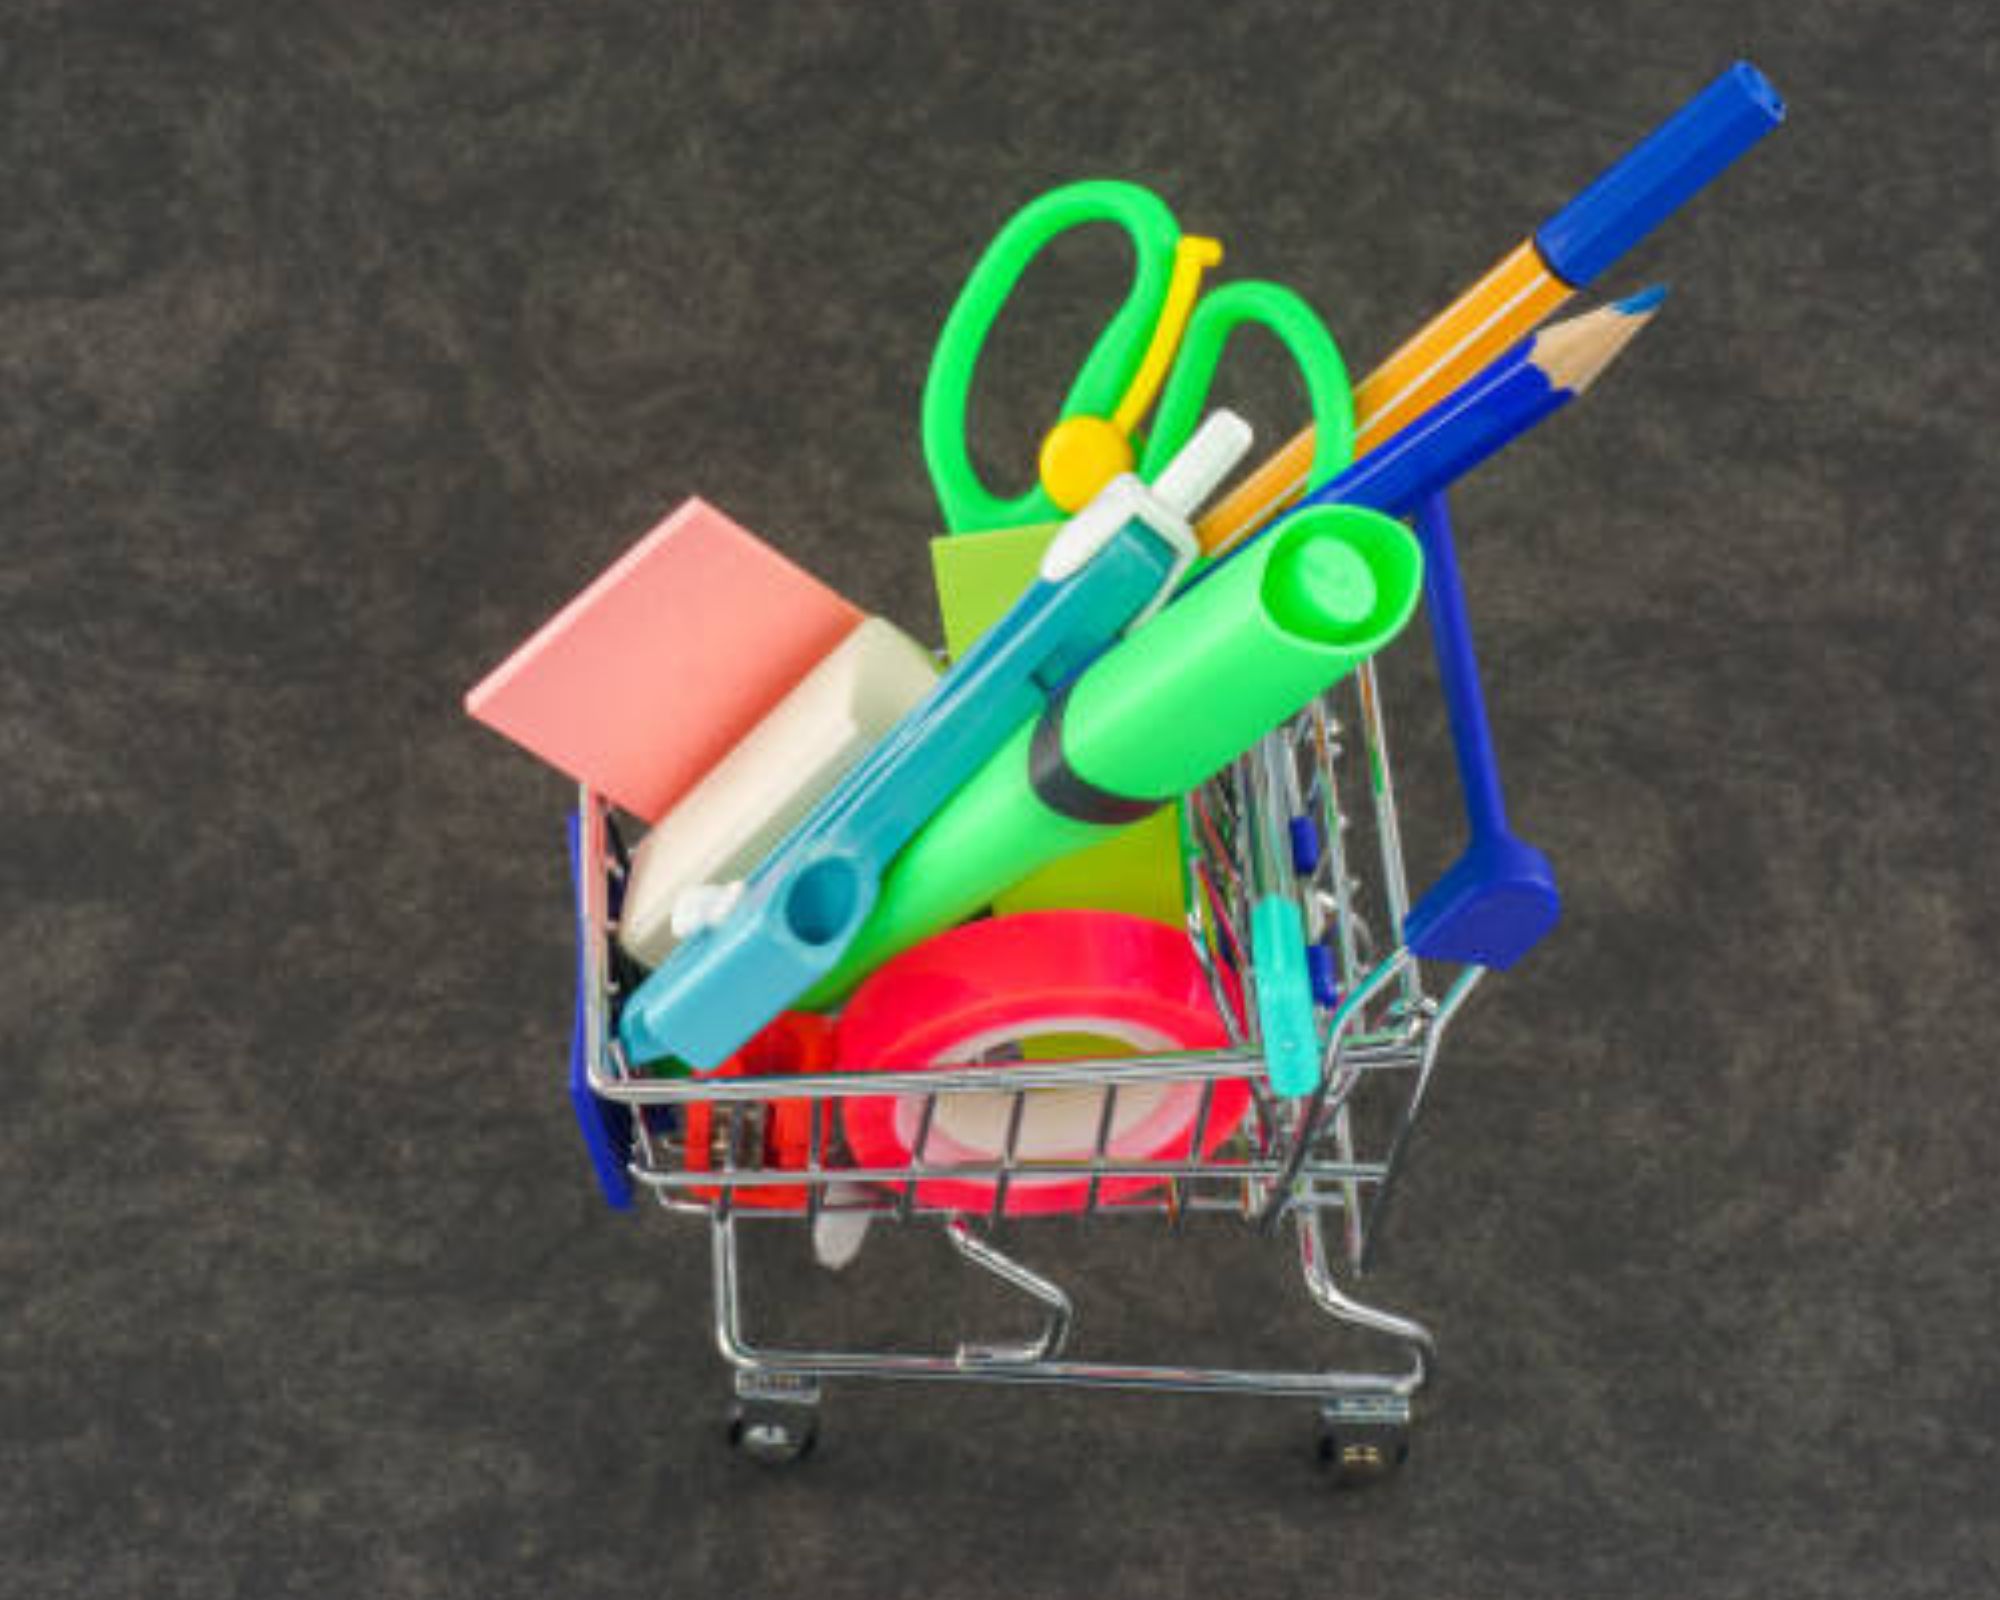 Hints on Minimizing The Cost of Last-Minute School Supplies